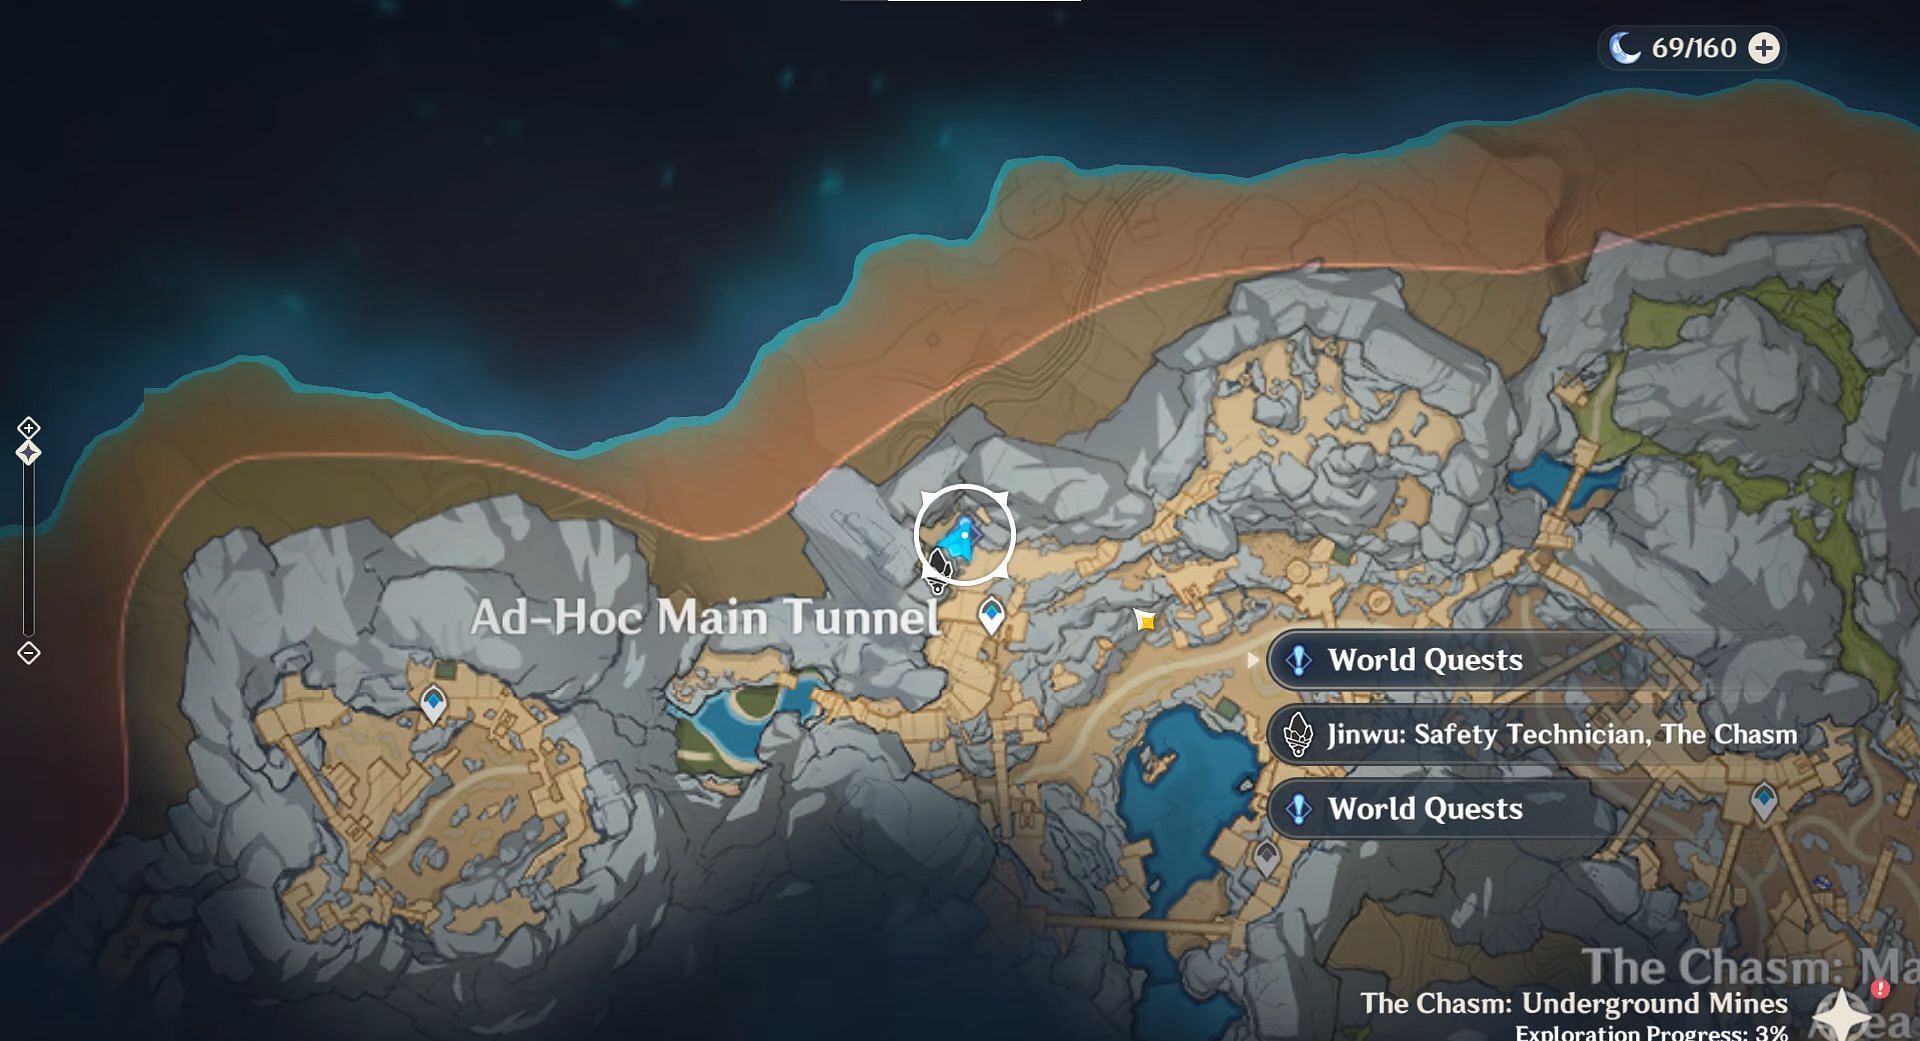 The world quest can be found here (Image via WowQuests)